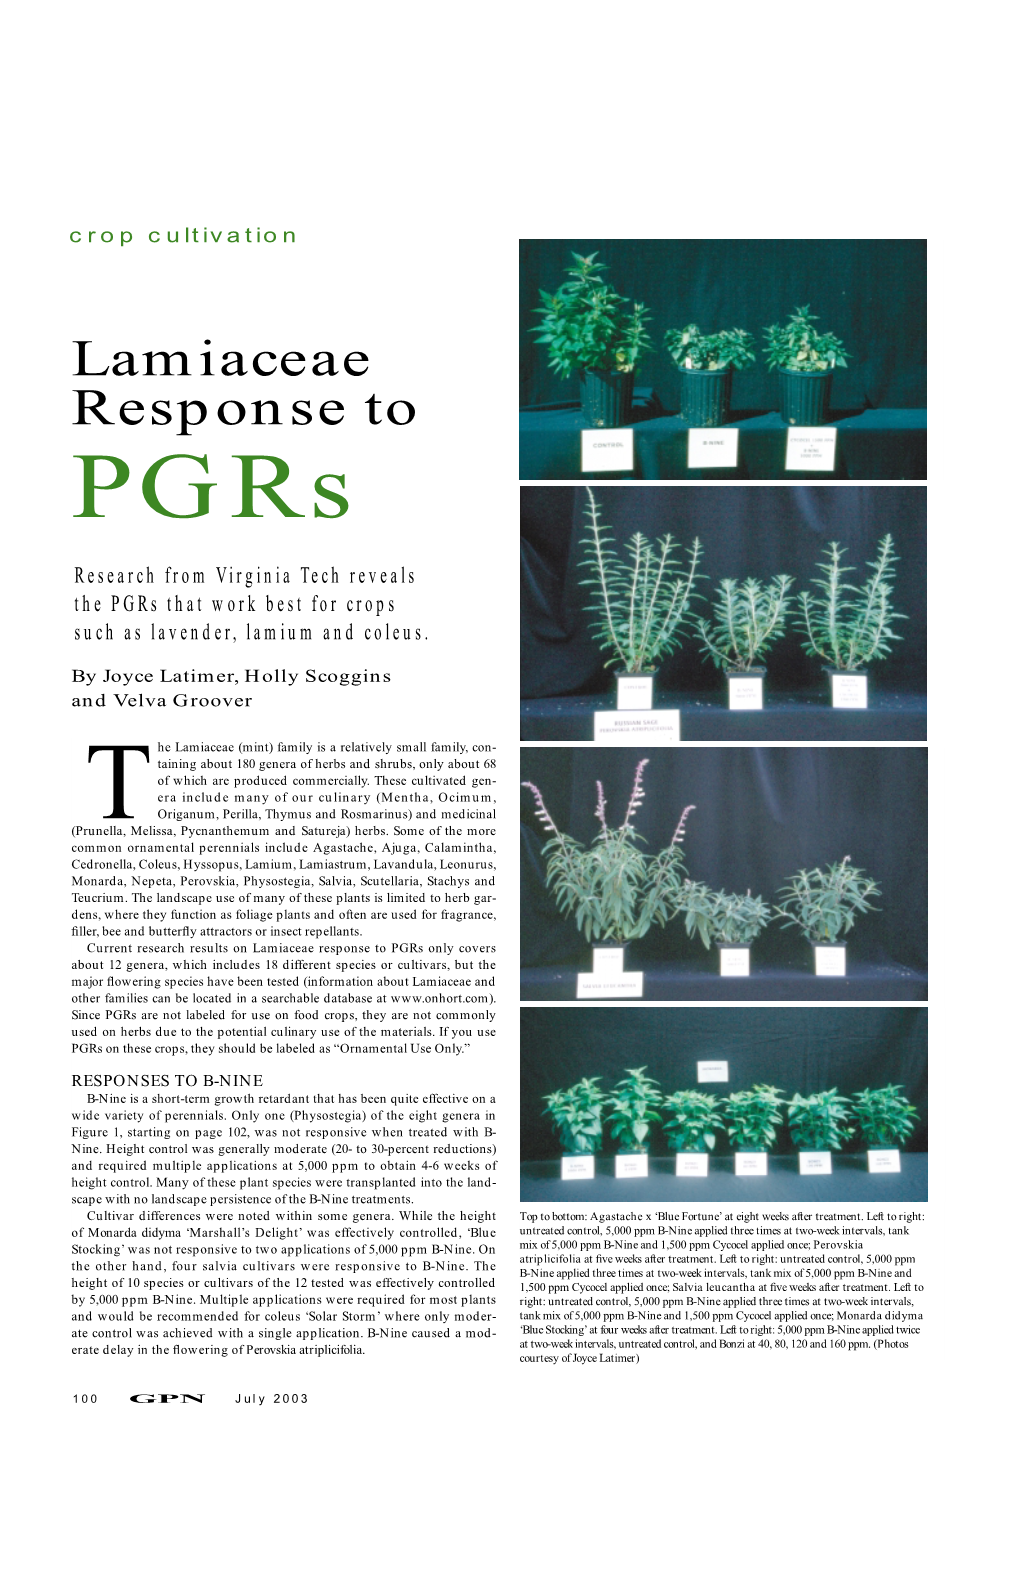 Lamiaceae Response to Pgrs